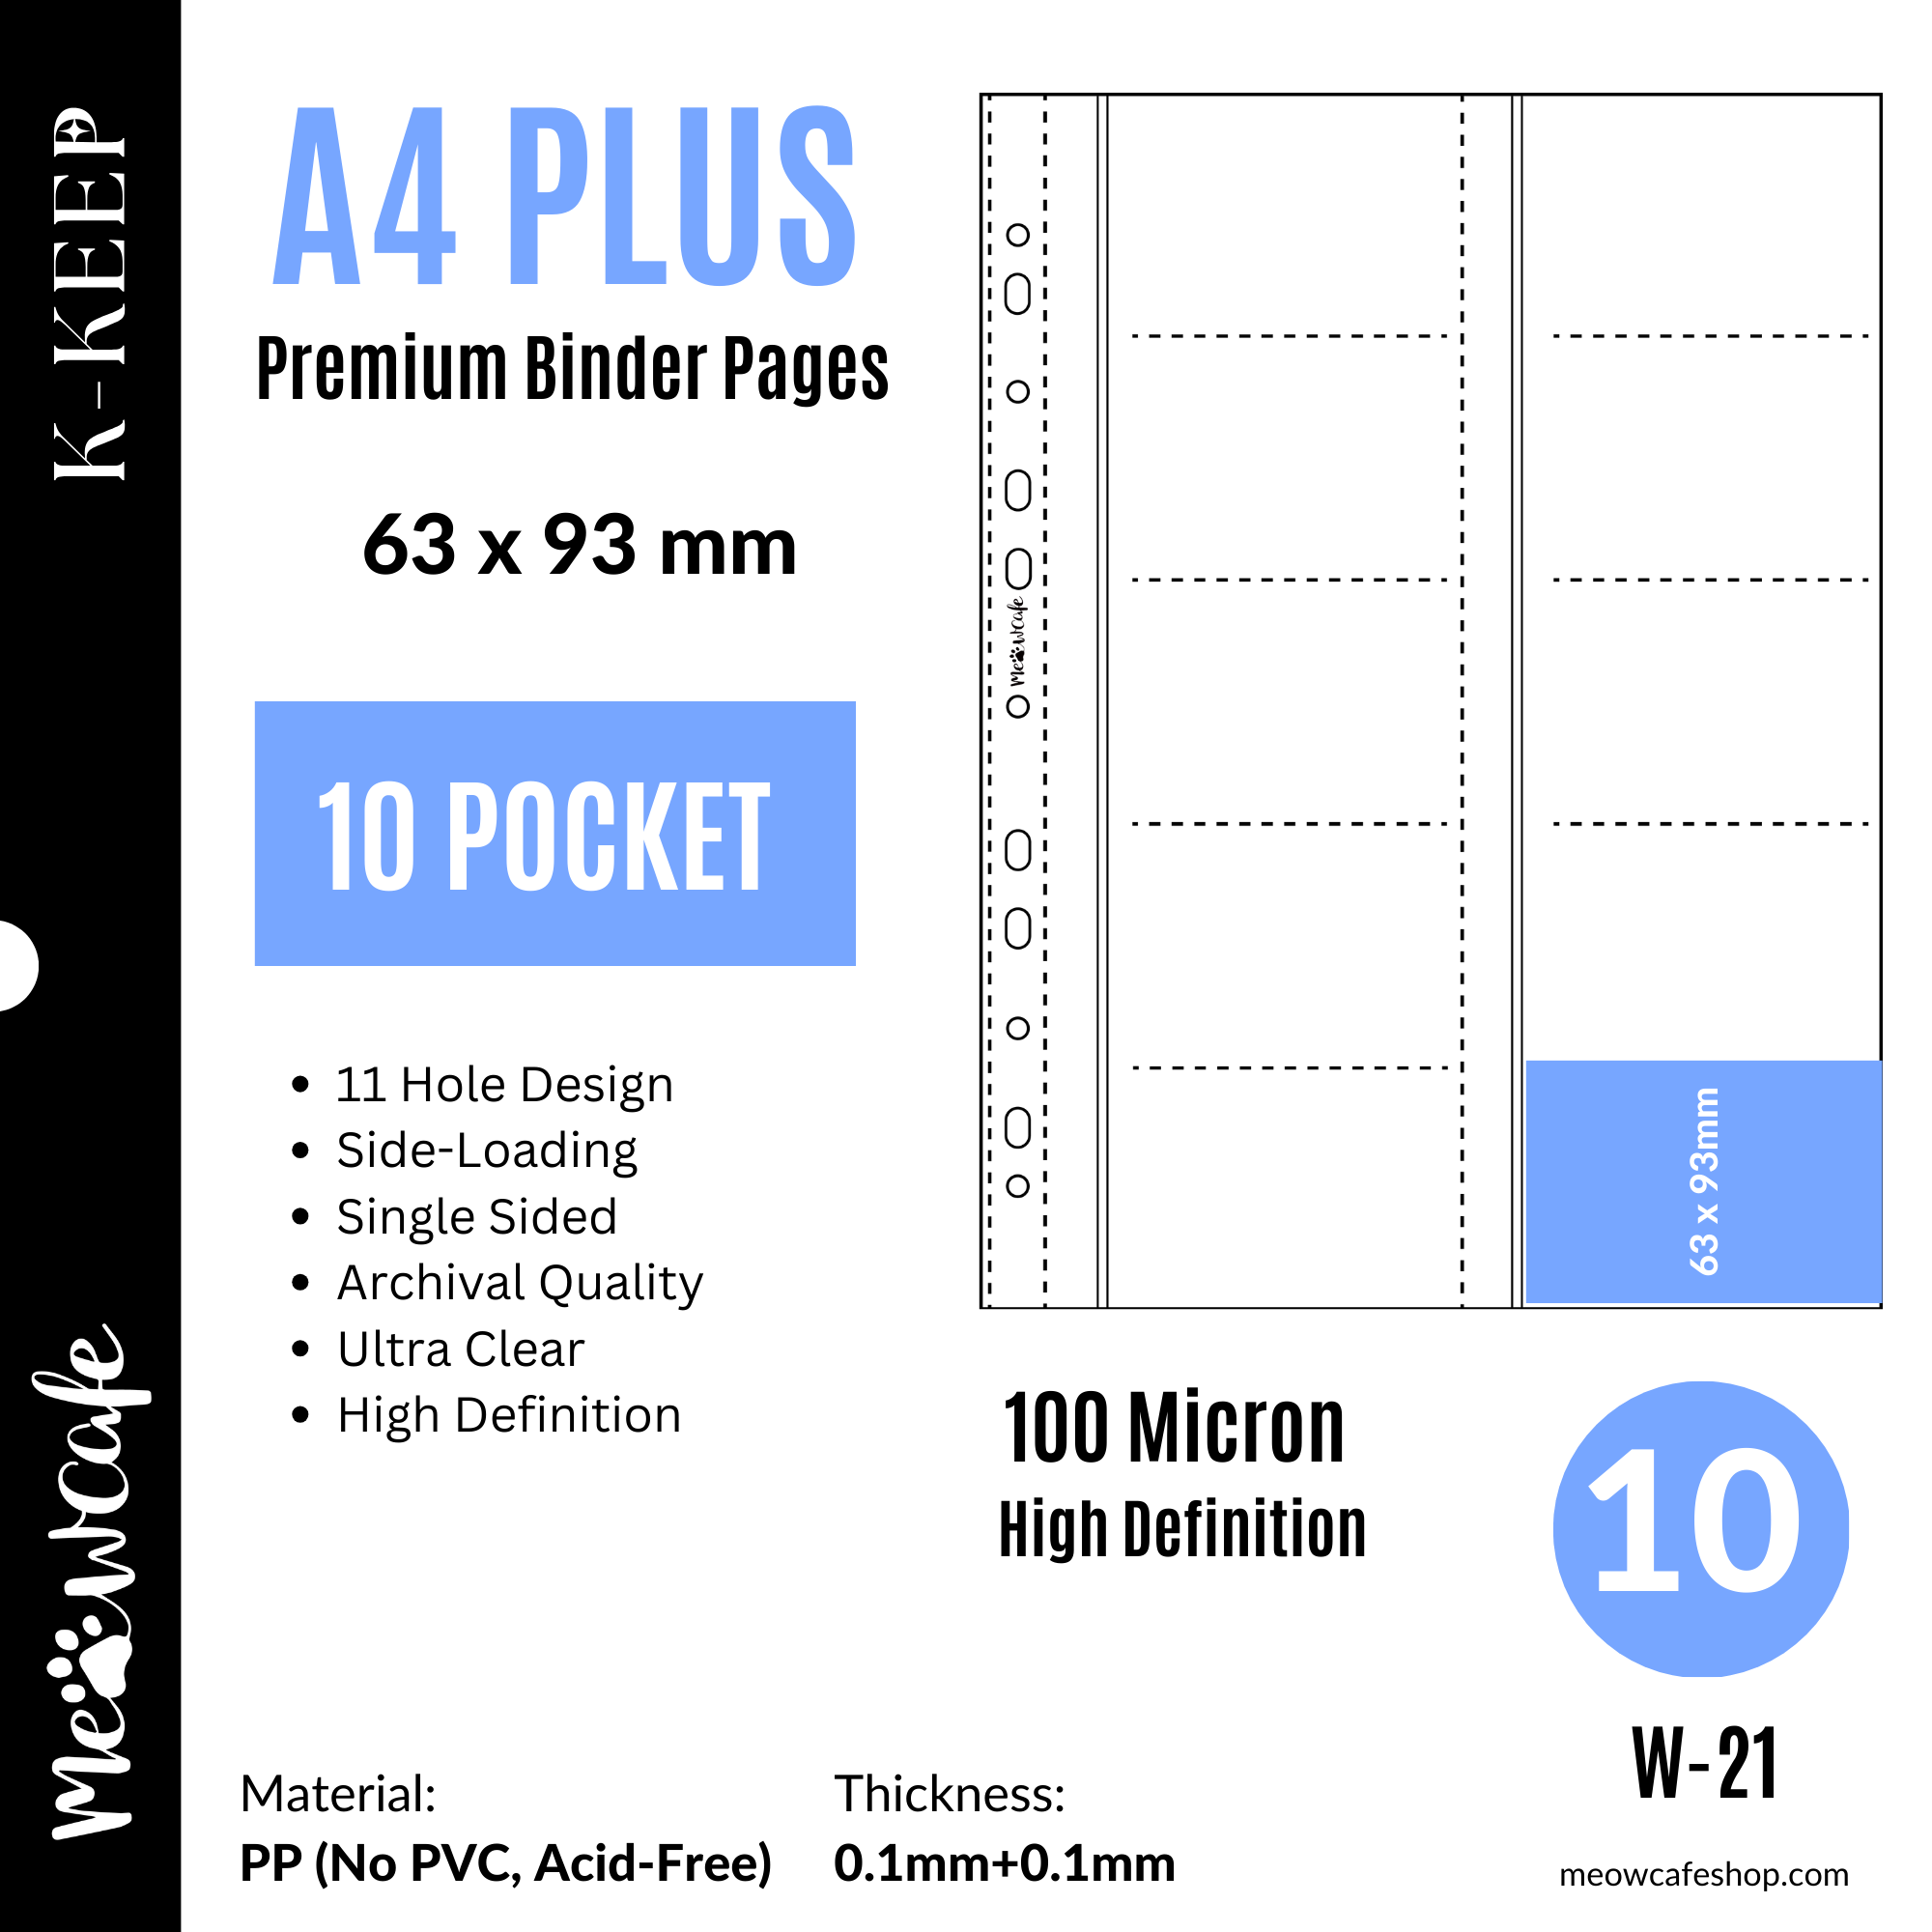 K-KEEP [A4 PLUS] - 10 Pocket 63x93mm - 11 Holes Premium Binder Pages, 100 Micron Thick, High Definition (Pack of 10) - (W-21)